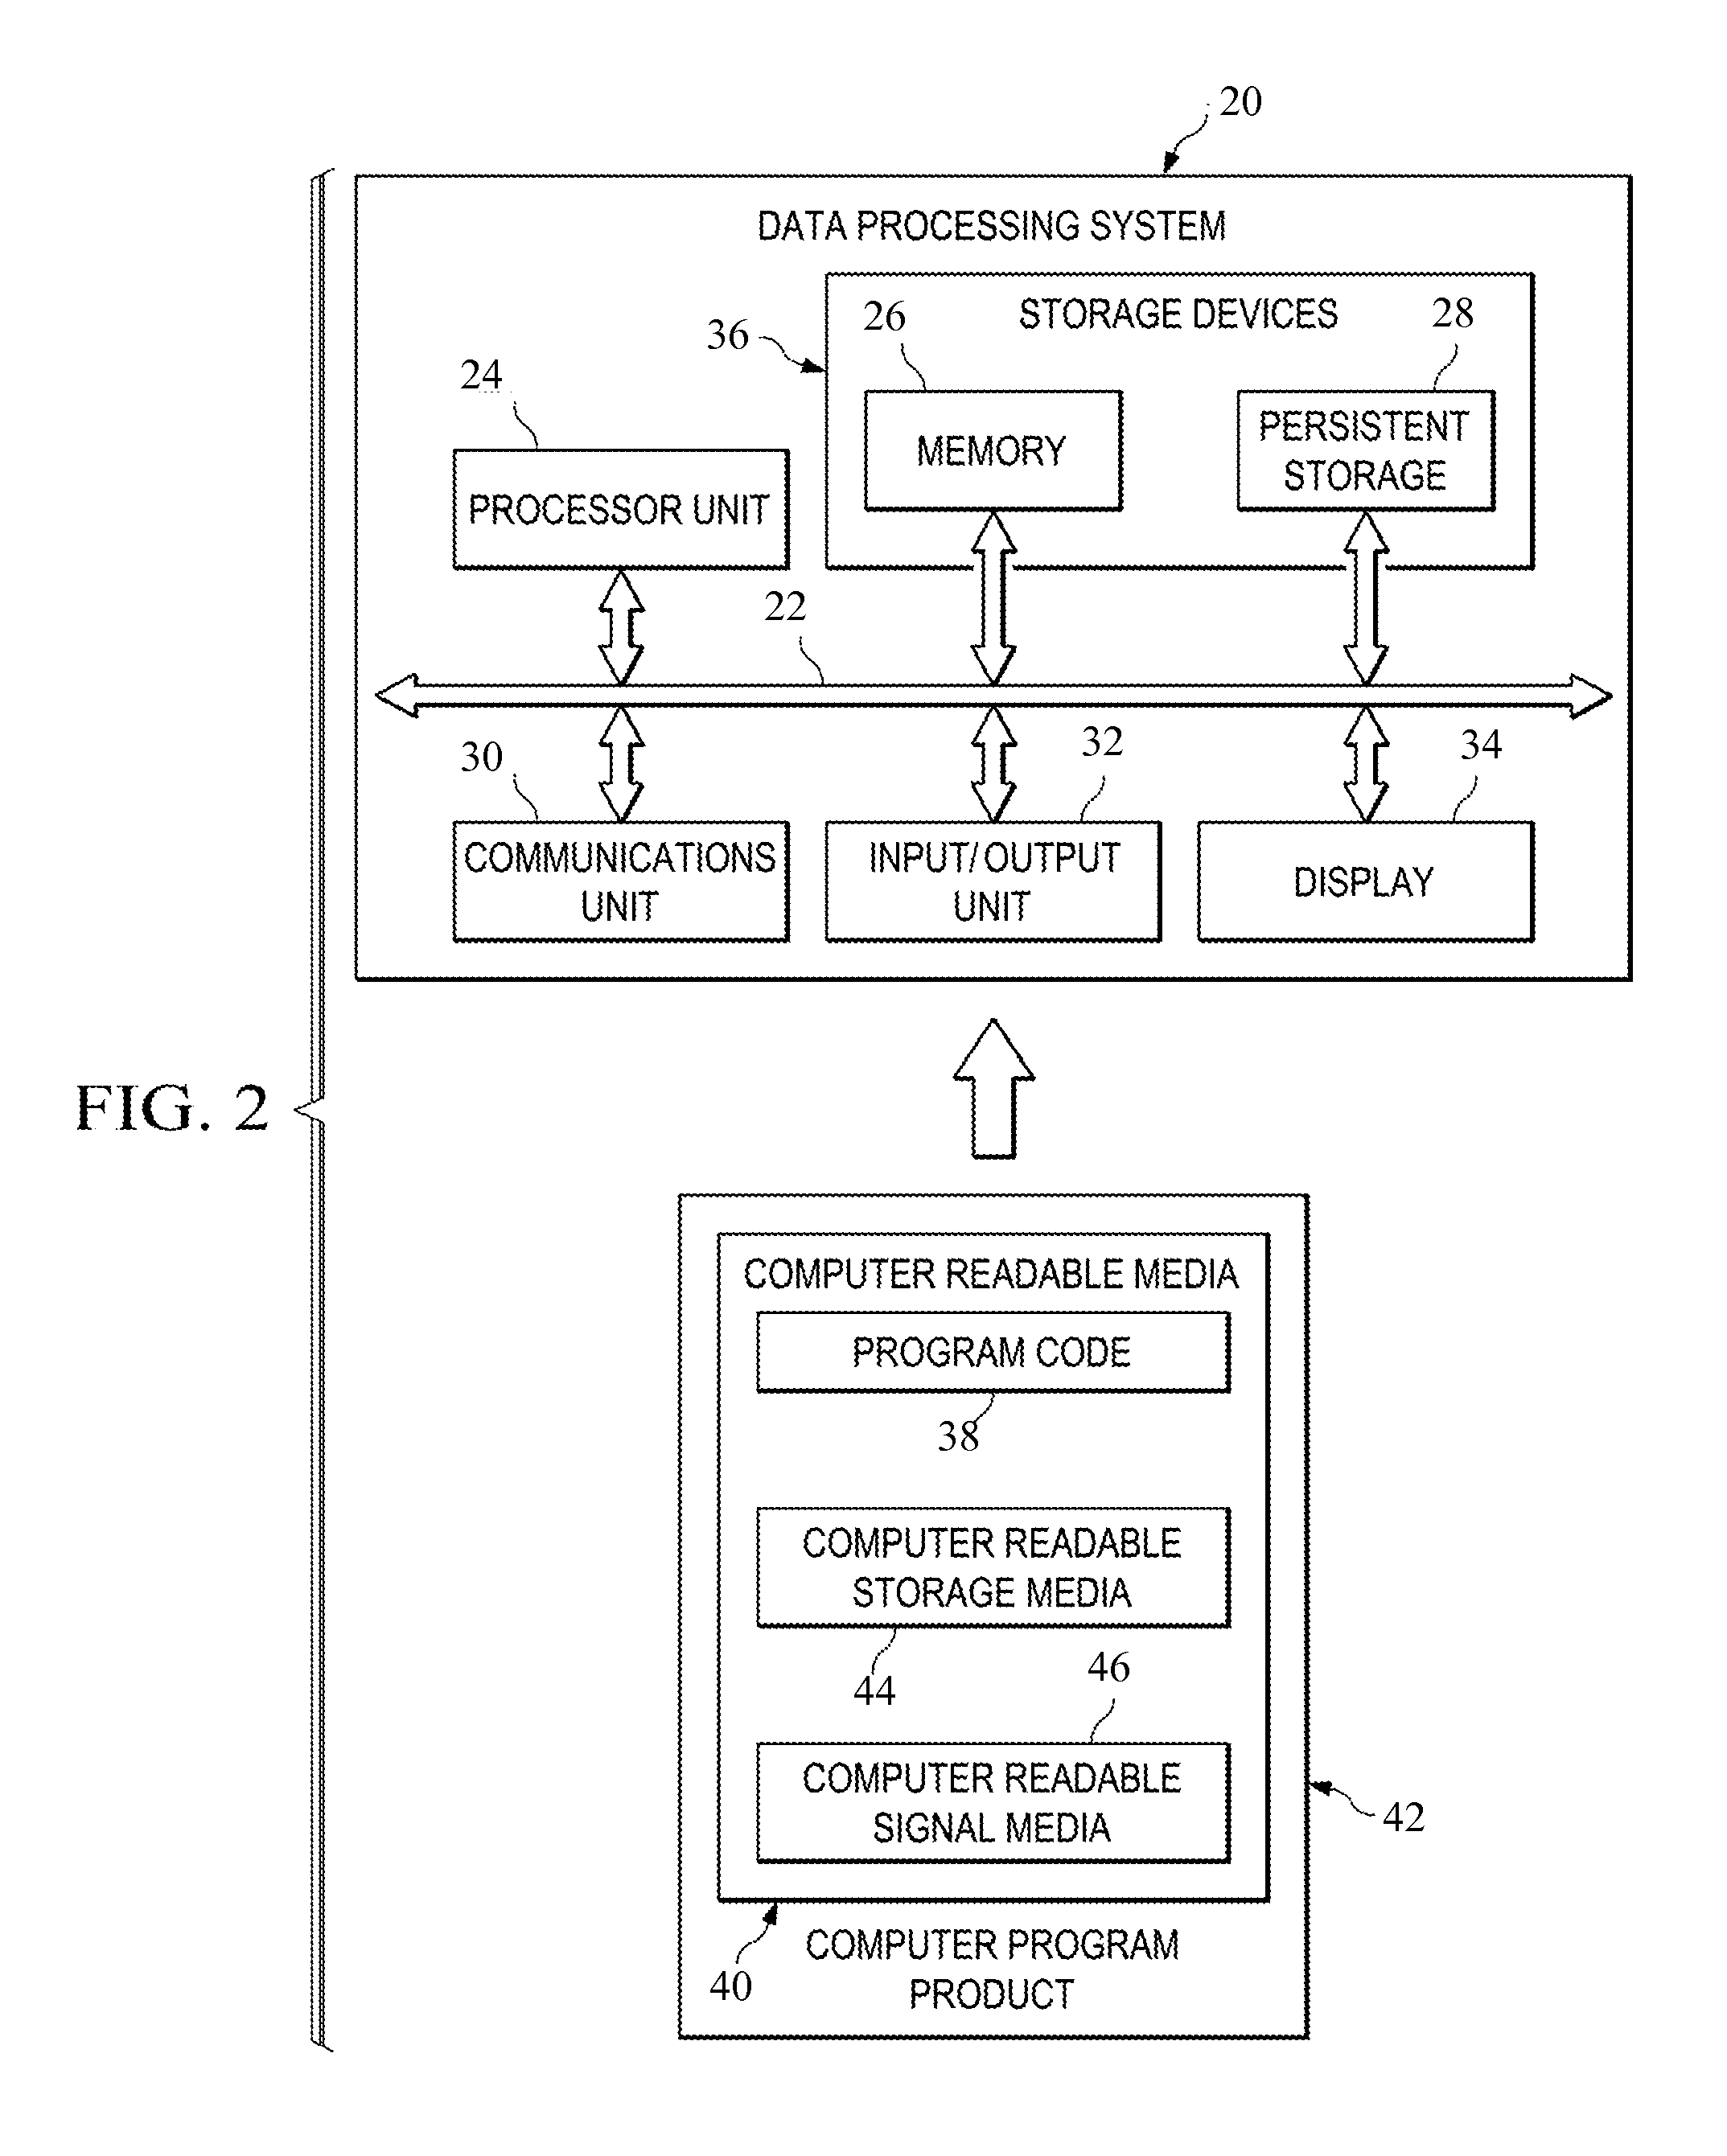 Recognition of and support for multiple versions of an enterprise canonical message model